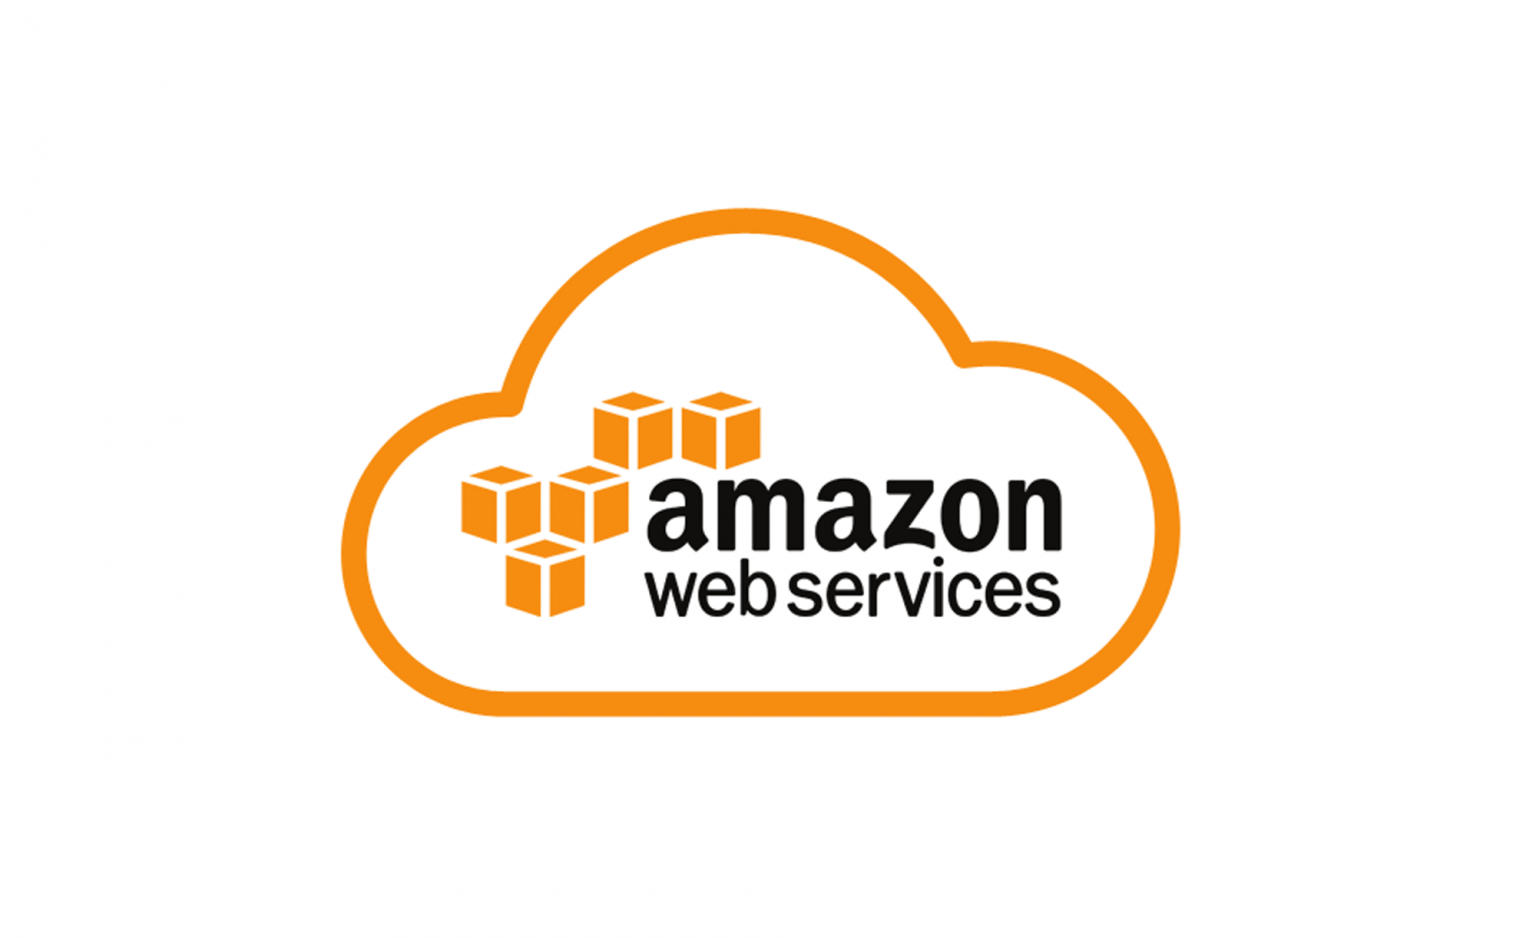 RBL Bank selects AWS as preferred cloud provider